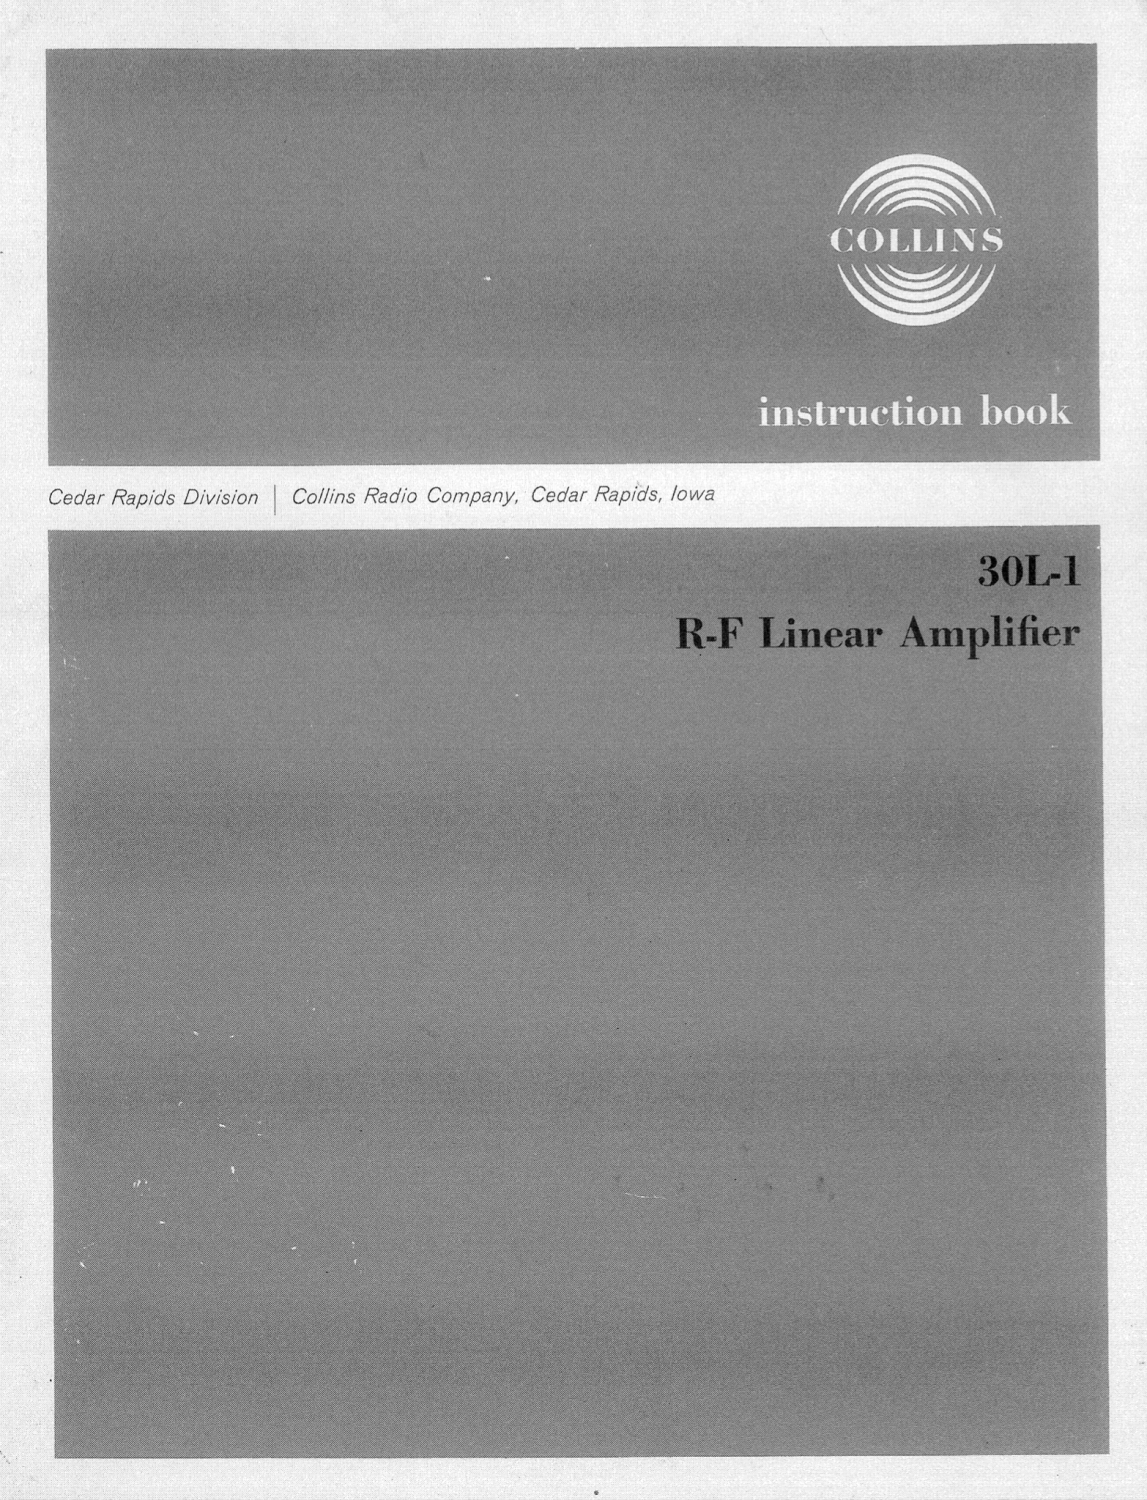 Collins 30L-1 - RF Linear Amplifier - Instruction Manual - 5th Edition - 1962-06